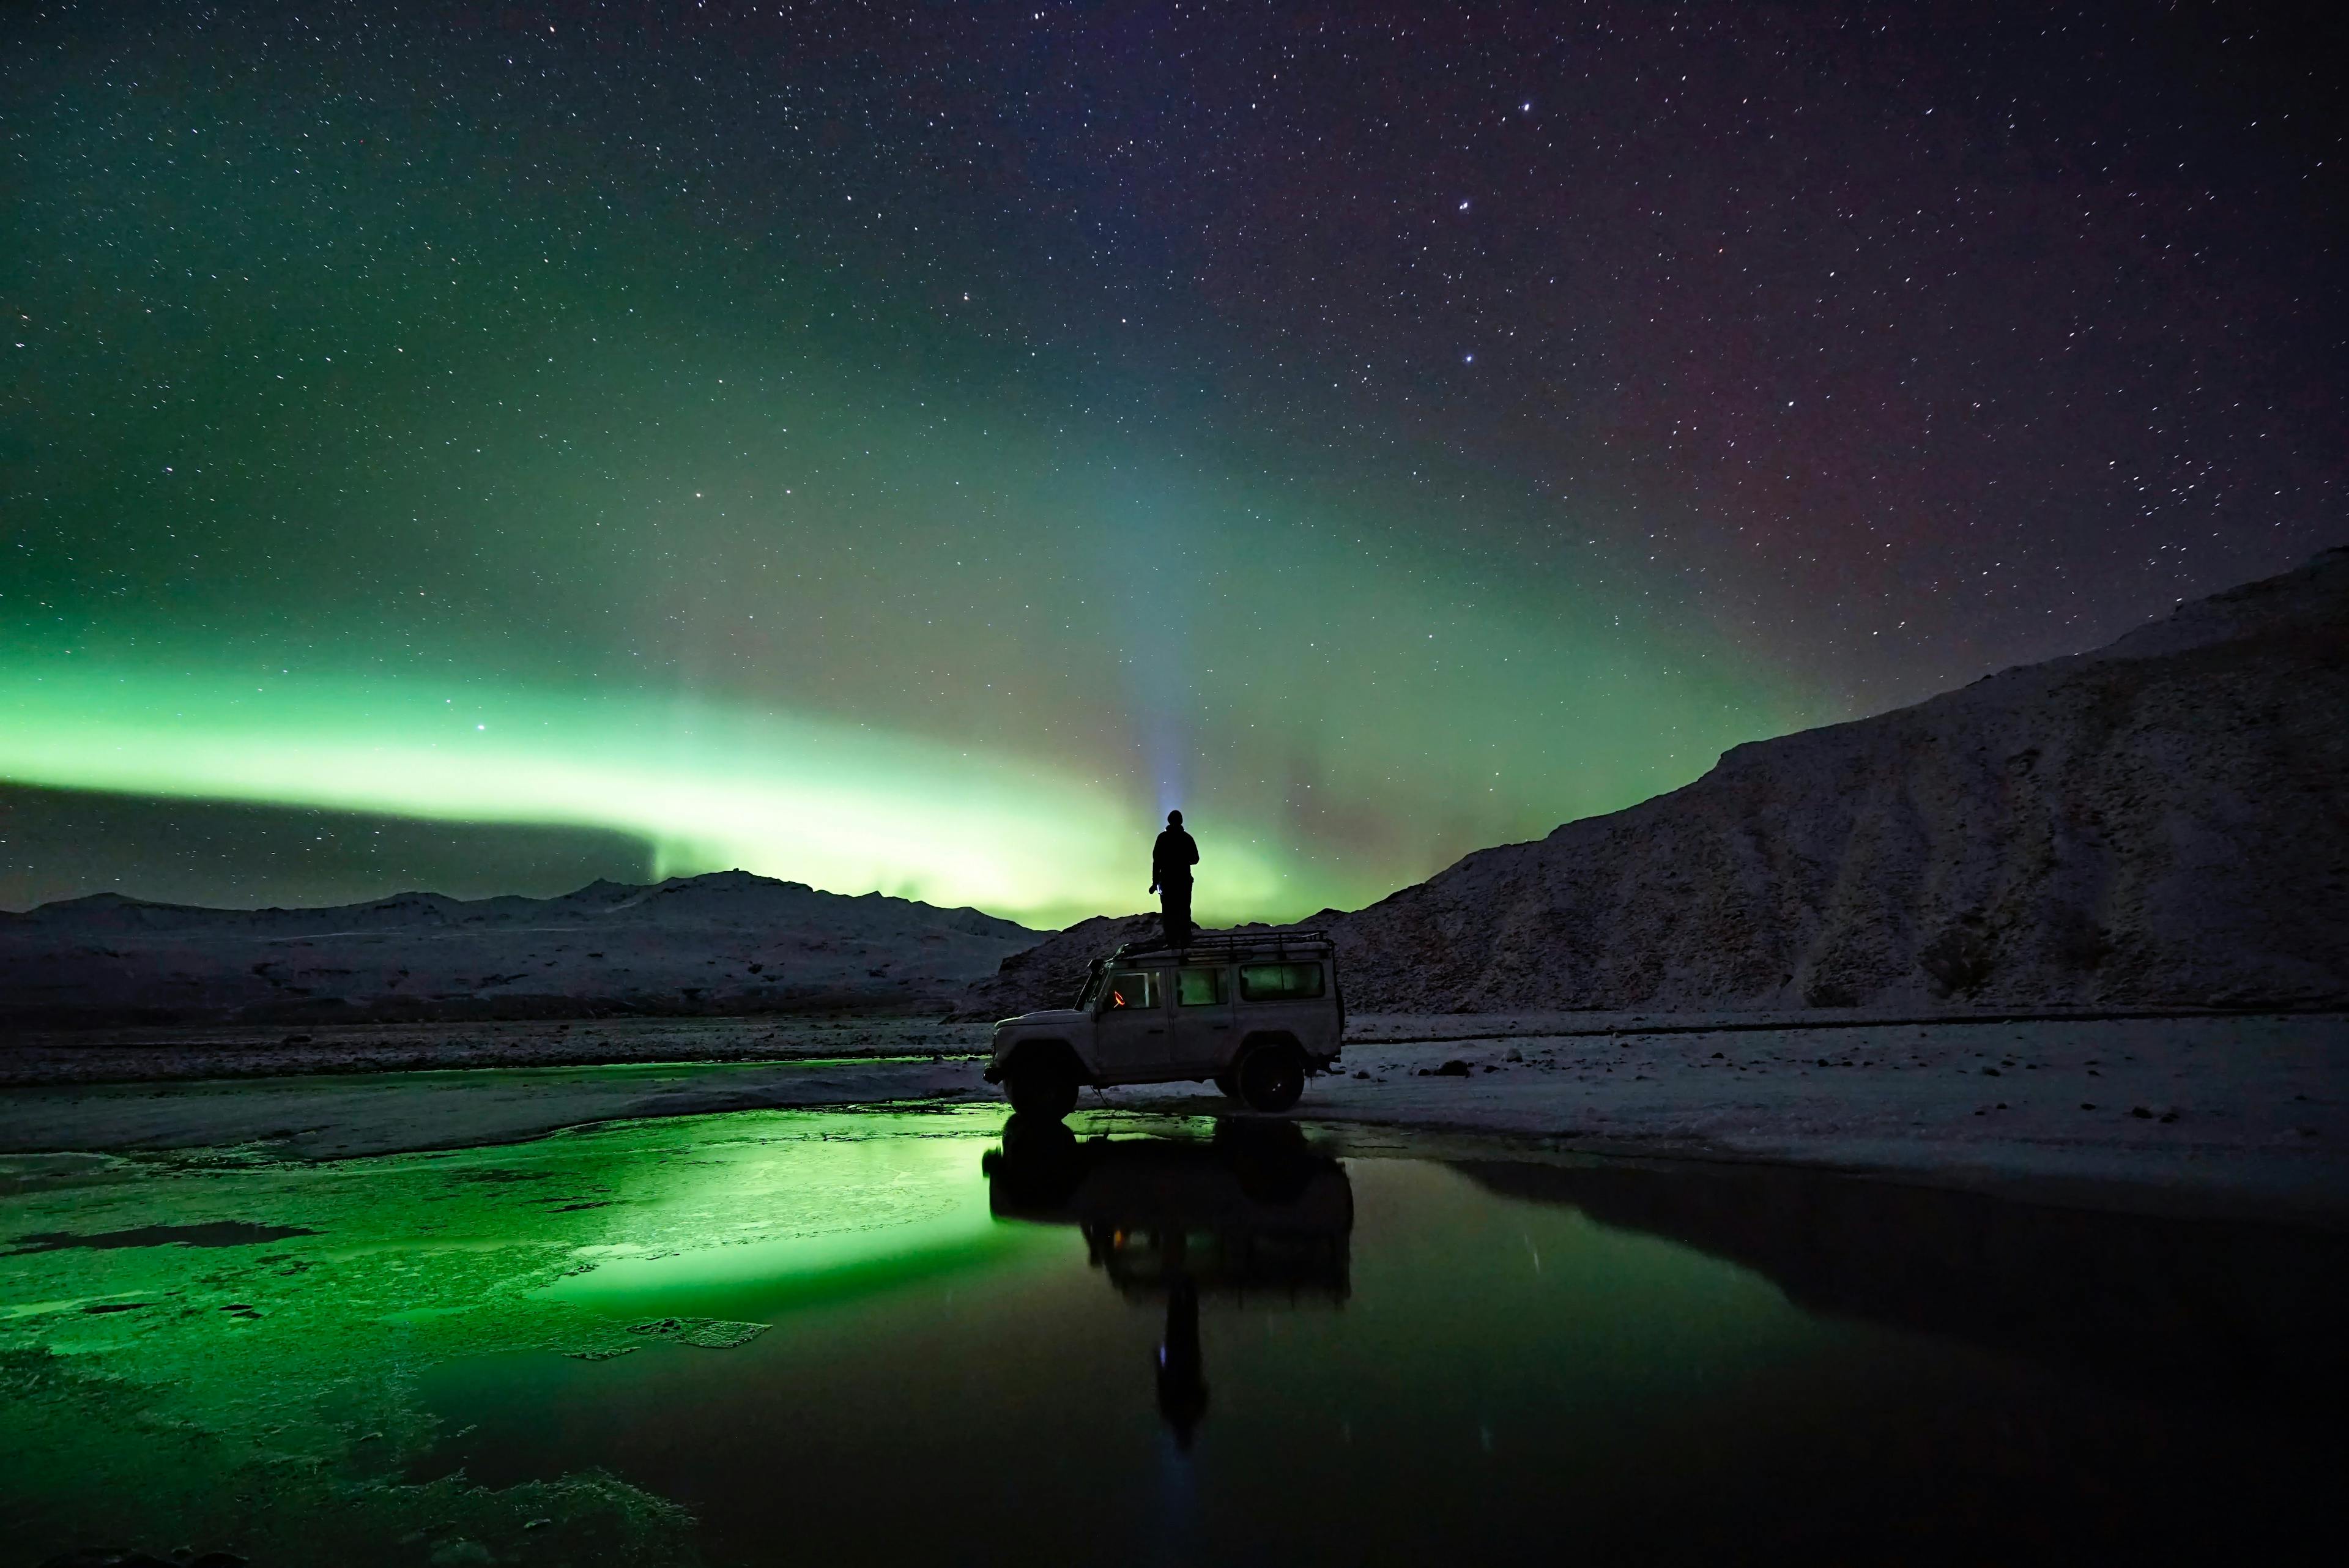 Image - Northern lights and a Land Rover